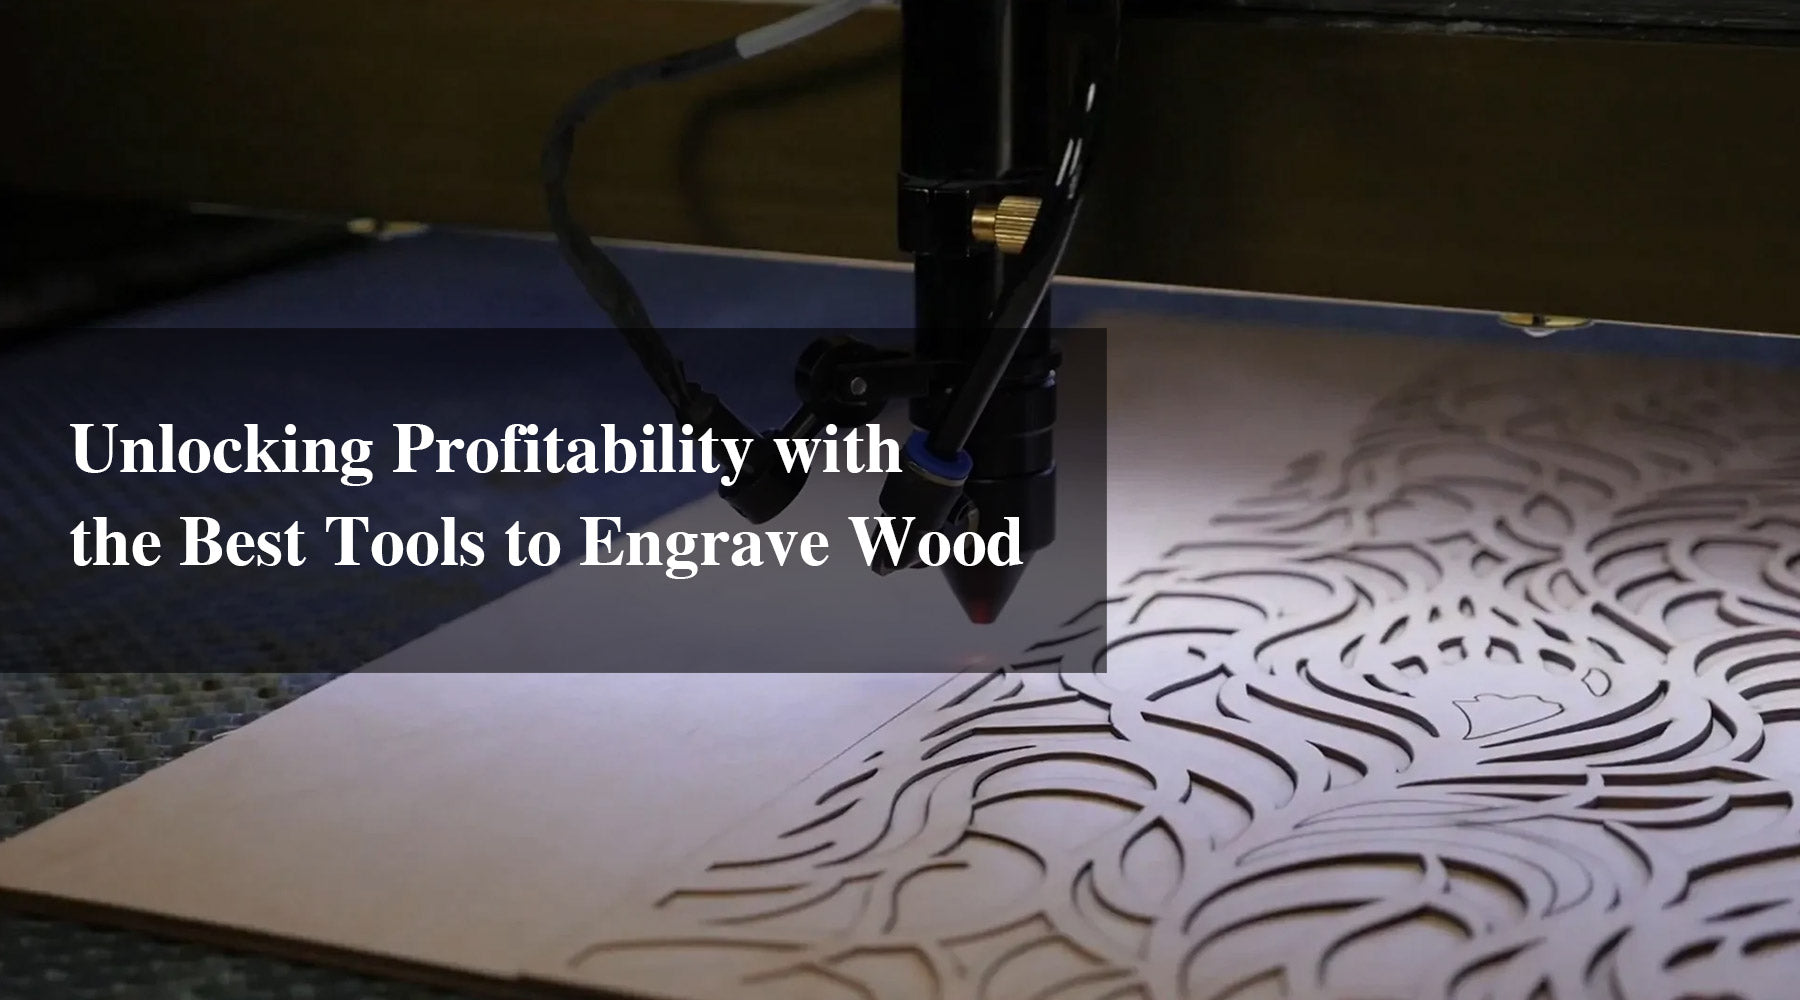 Unlocking Profitability with the Best Tools to Engrave Wood